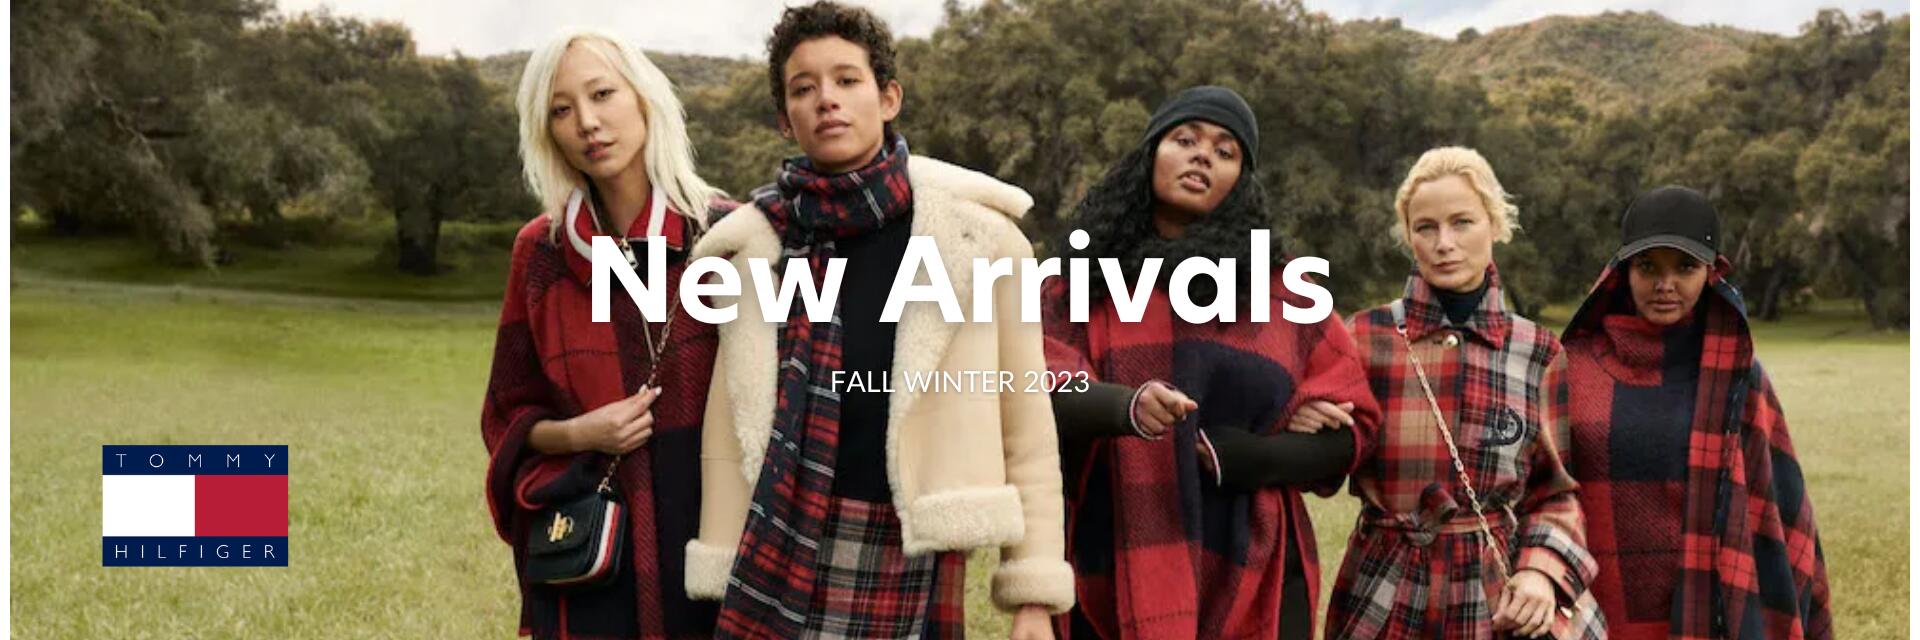 Tommy Hilfiger New arrivals Fall Winter 2023